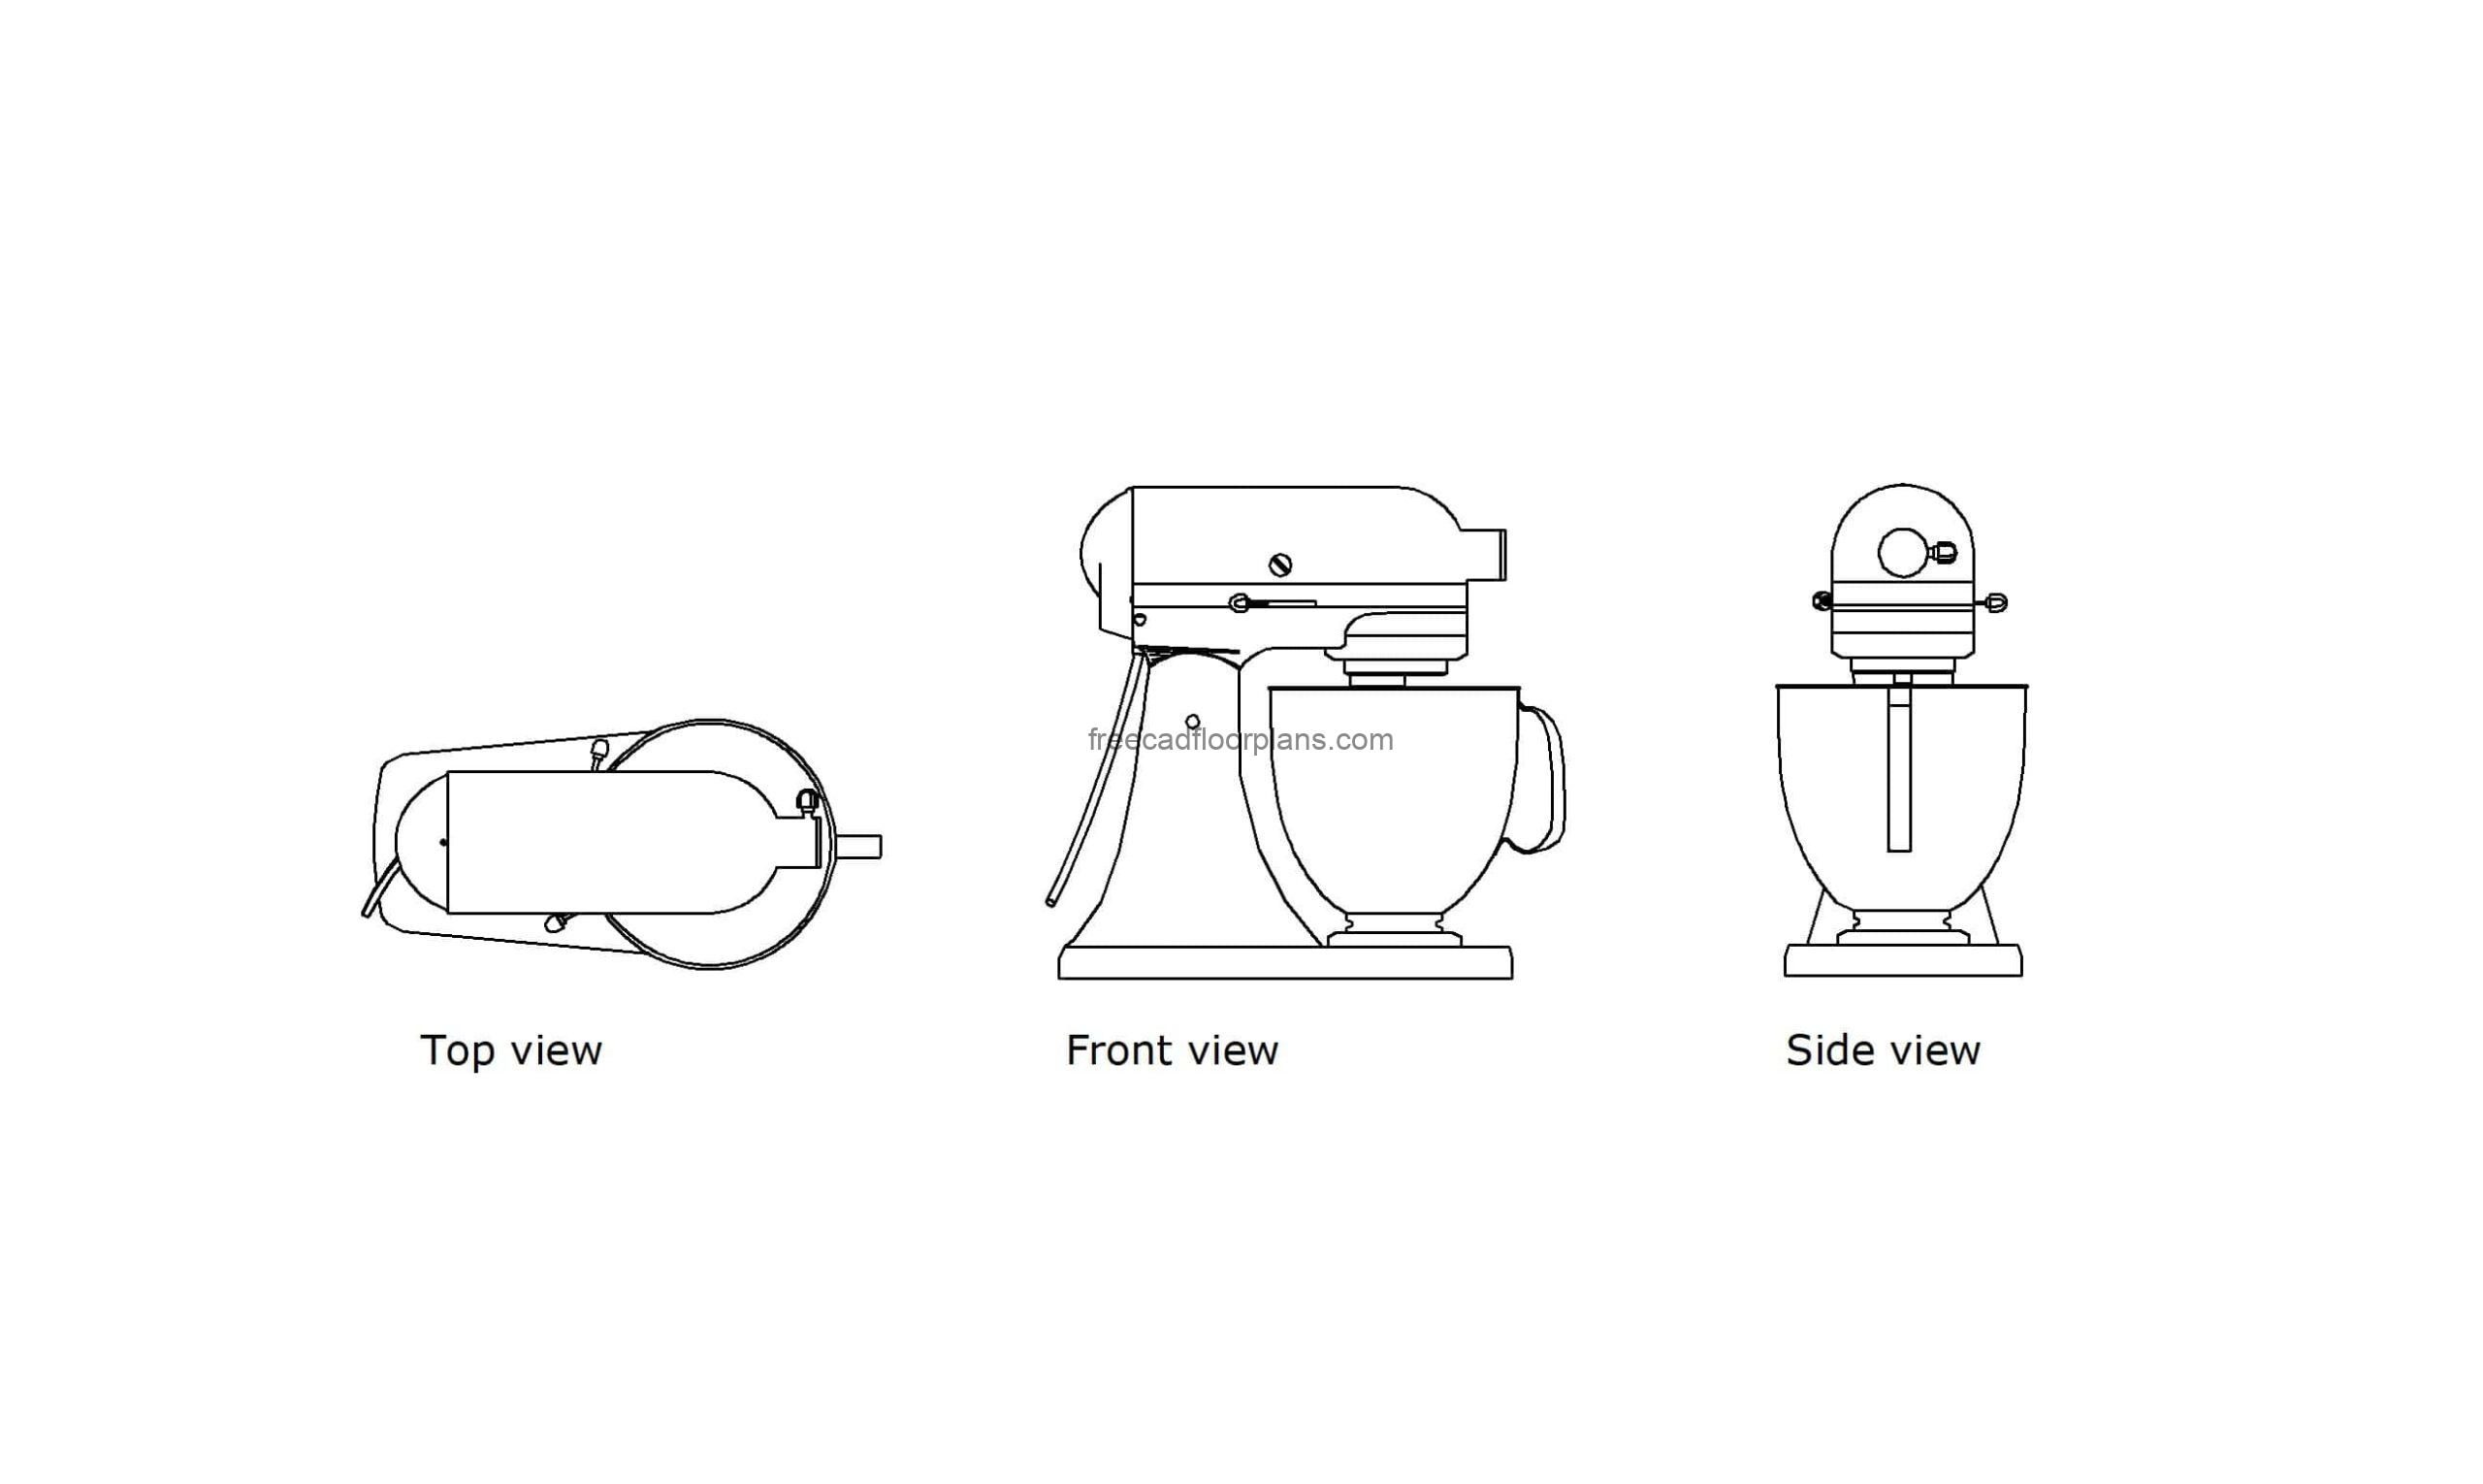 autocad drawing of a kitchen aid mixer, dwg plan and elevation 2d views, file for free download